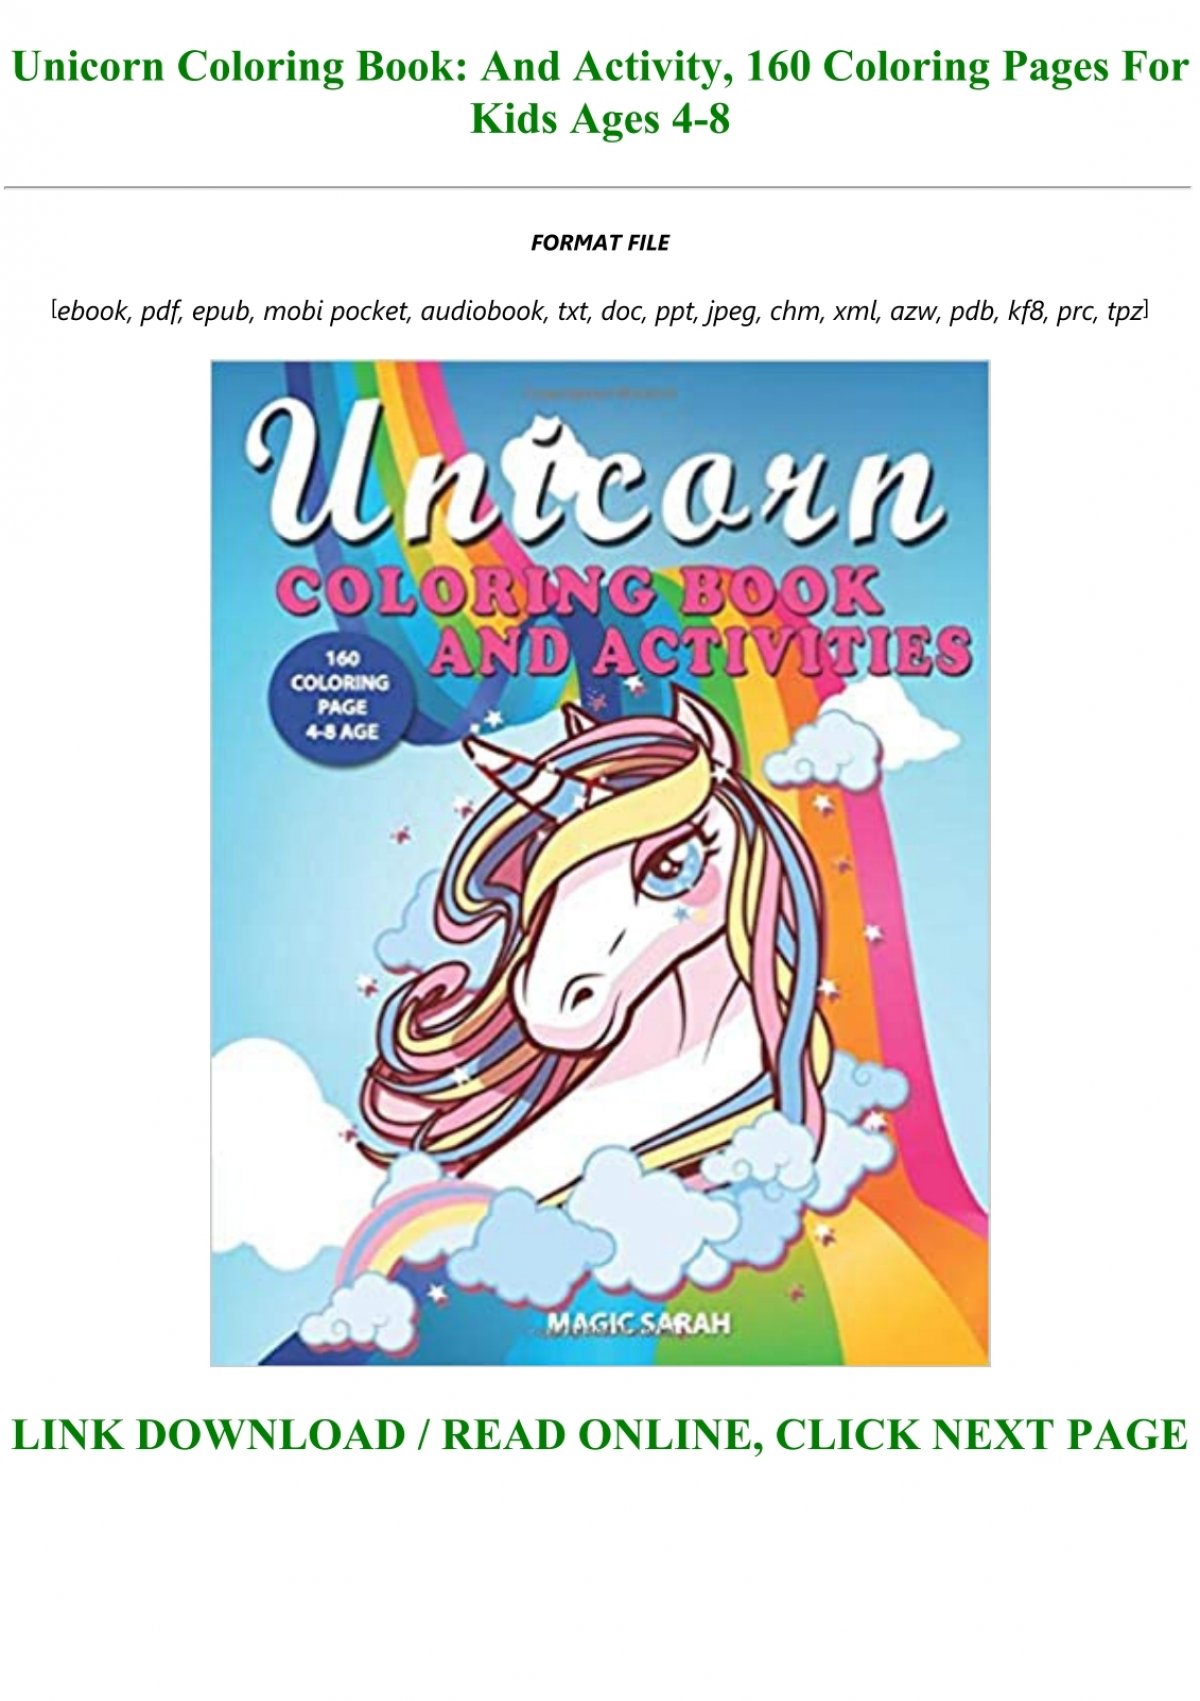 Download Pdf Unicorn Coloring Book And Activity 160 Coloring Pages For Kids Ages 4 8 Full